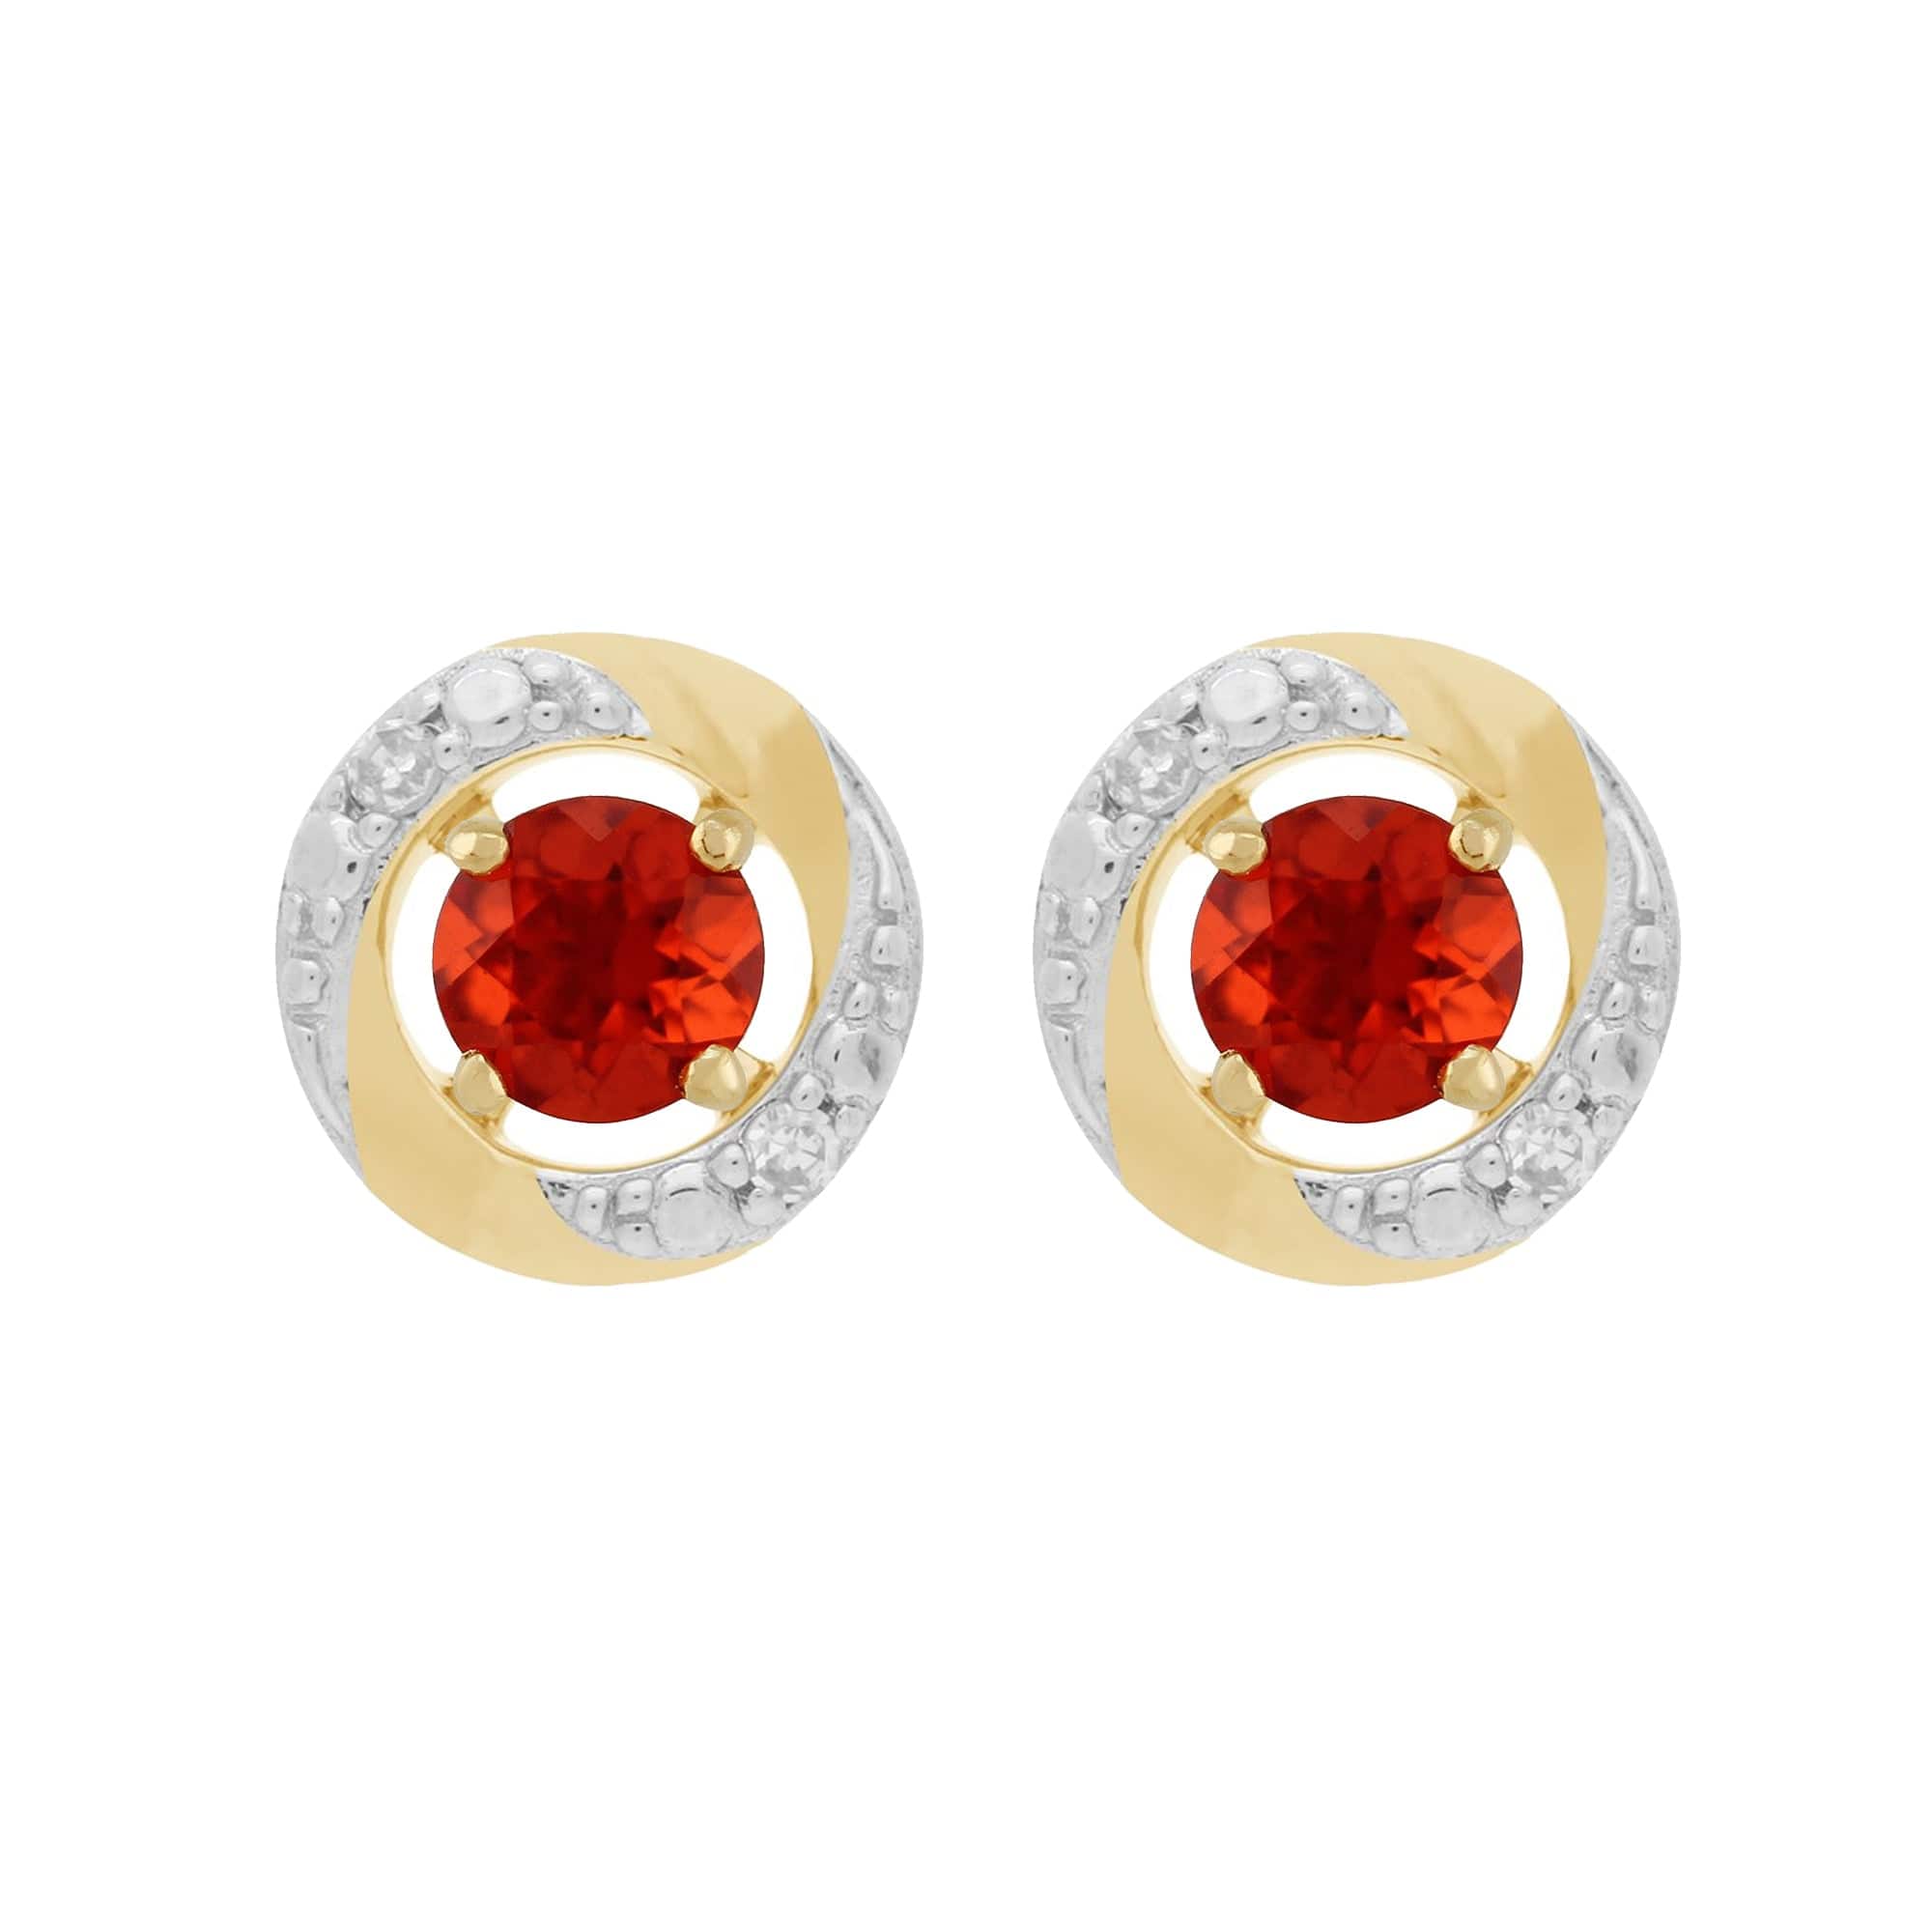 11561-191E0374019 Classic Round Fire Opal Stud Earrings with Detachable Diamond Halo Ear Jacket in 9ct Yellow Gold 1